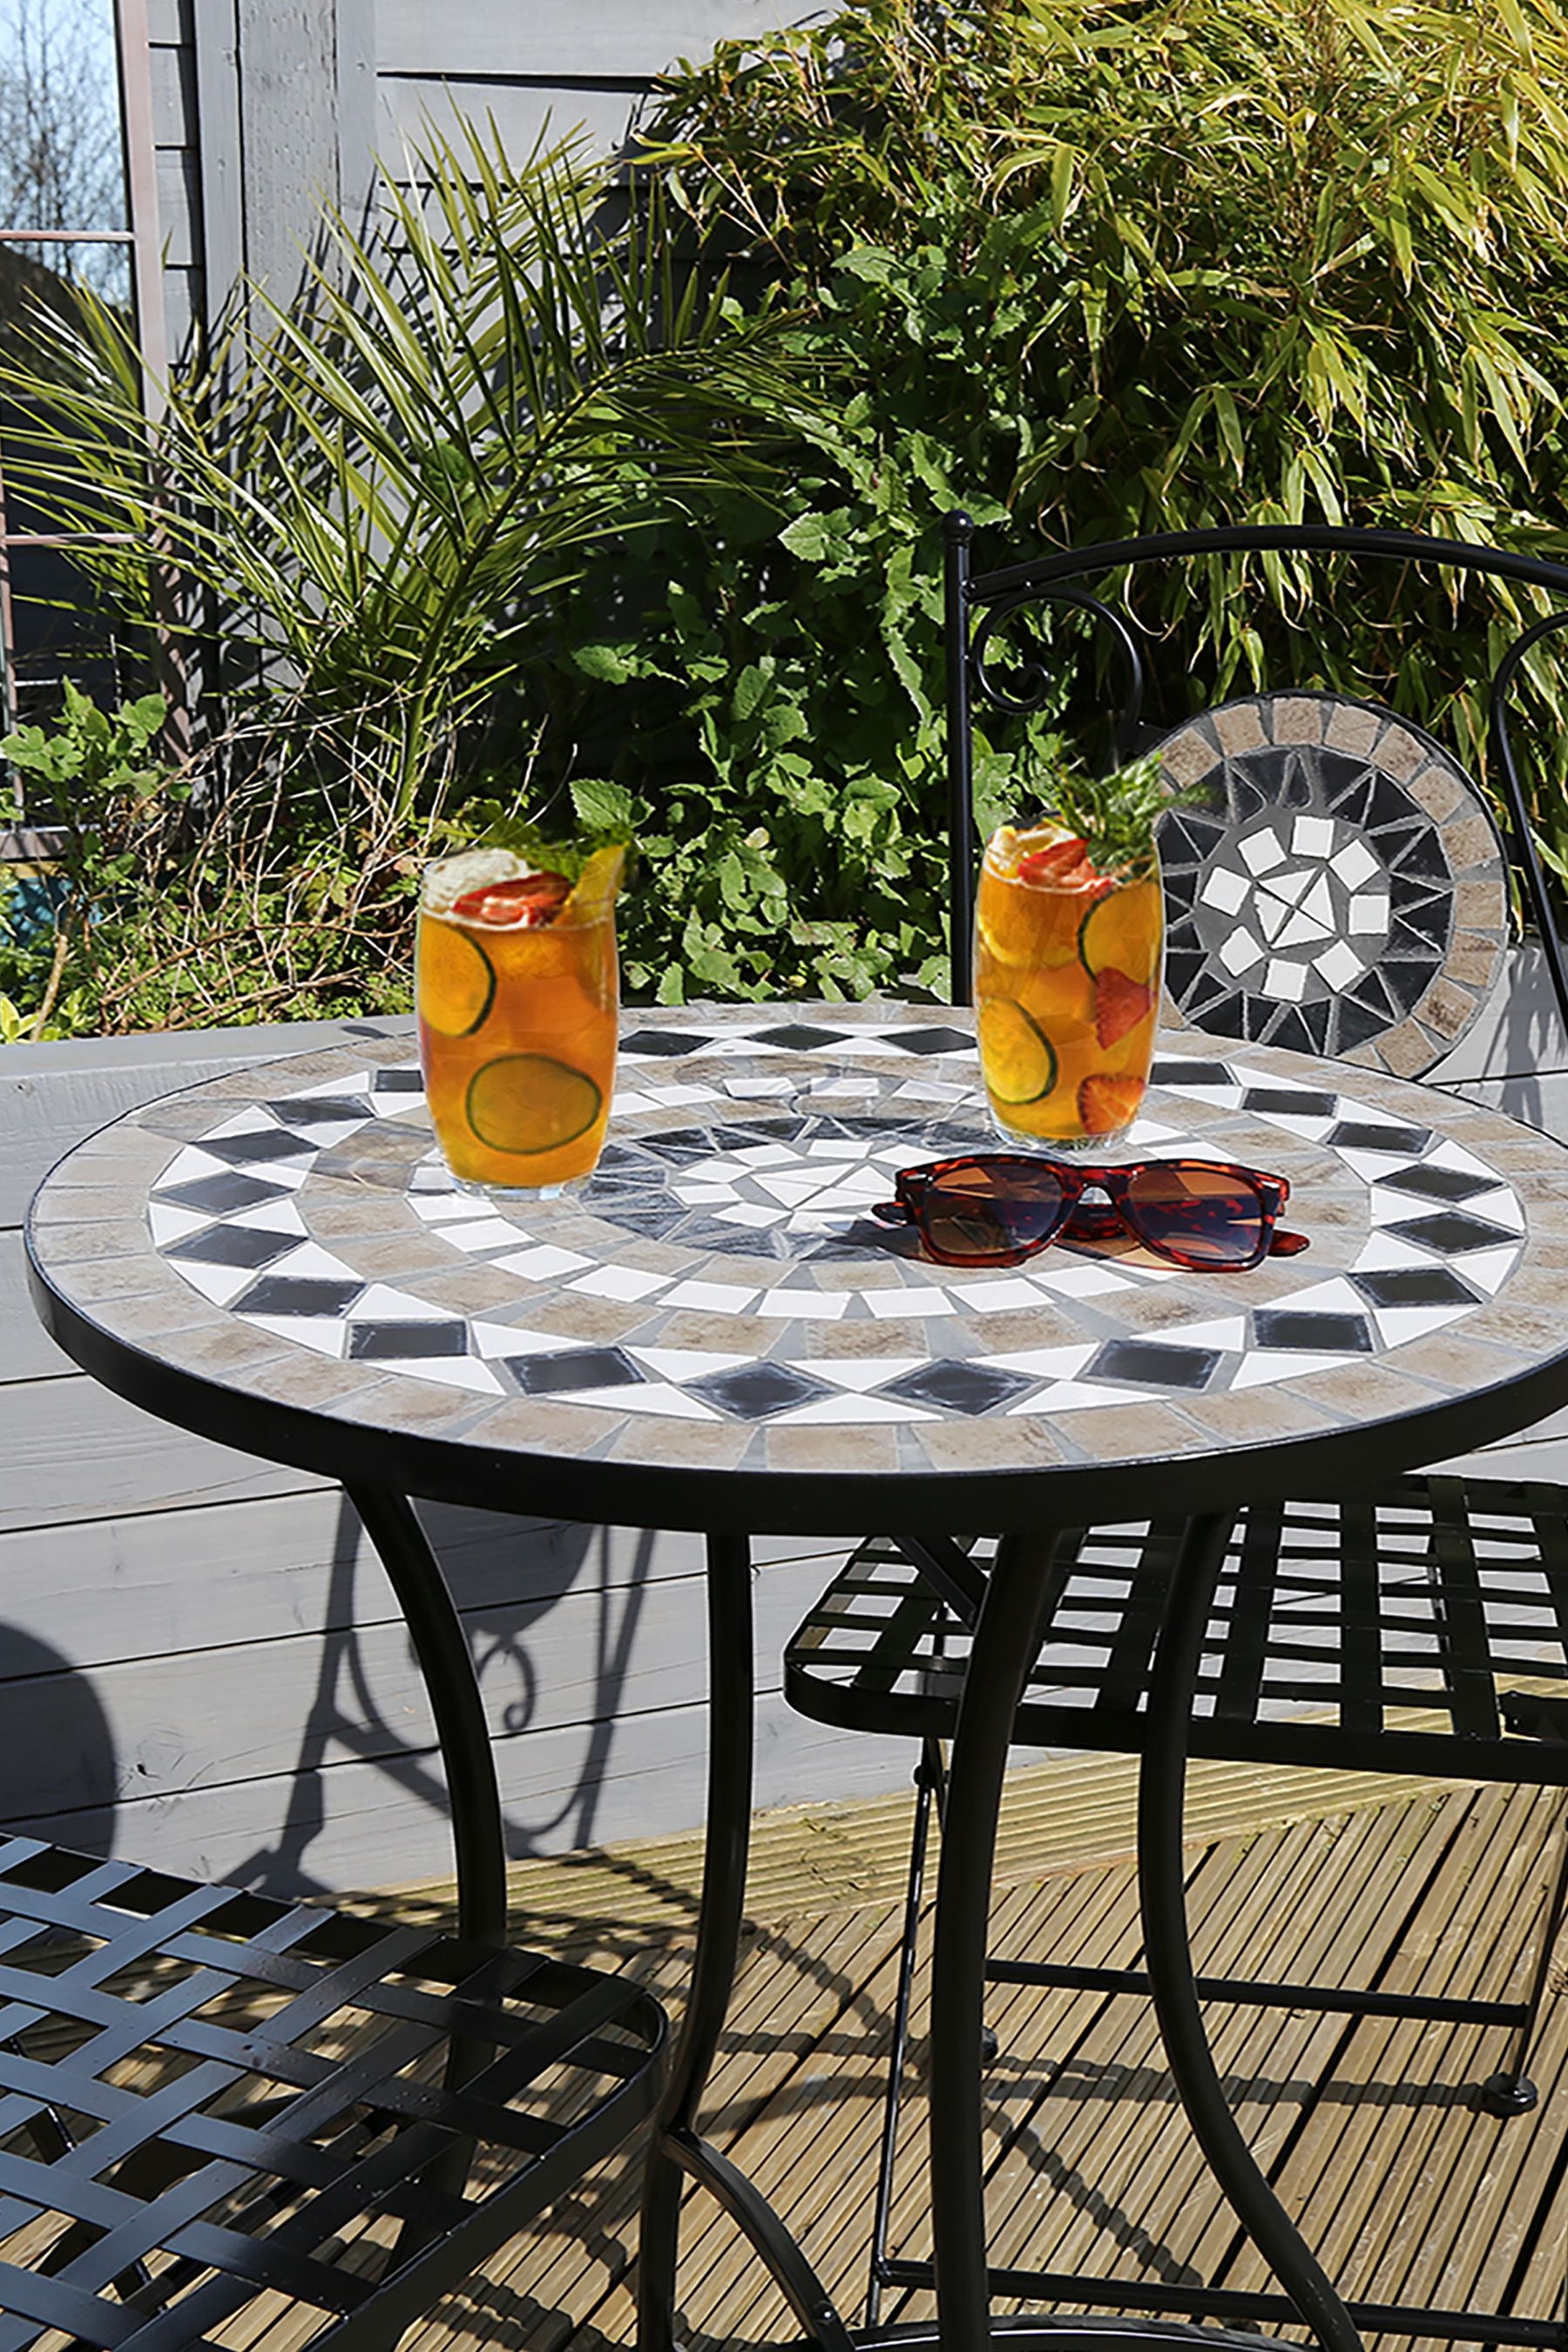 Buy Mosaic Bistro Set By Charles Bentley from the Next UK online shop